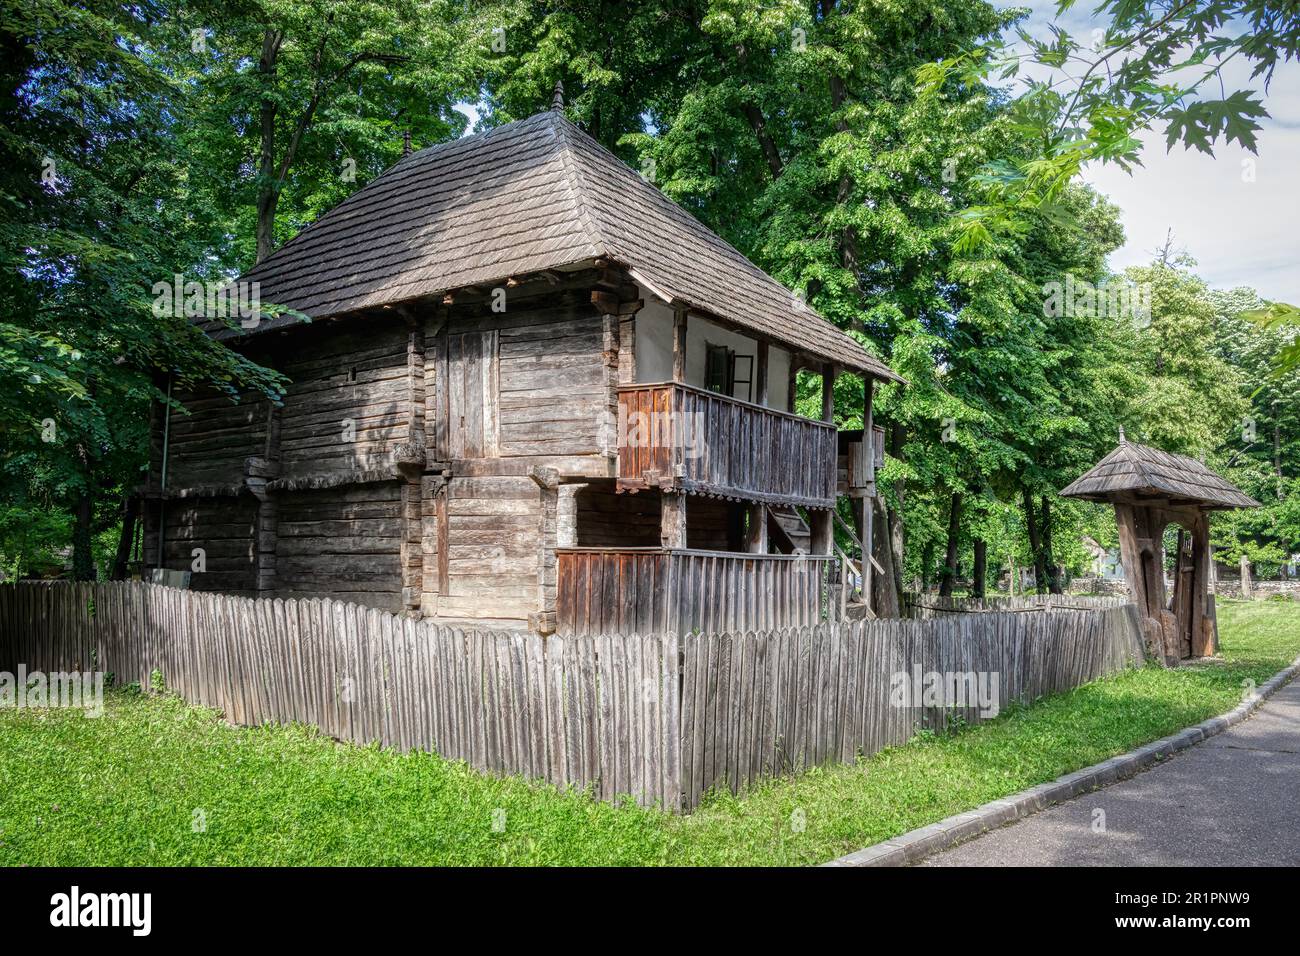 The Village Museum in King Michael I Park, Bucharest, Romania. A collection of reconstructed historical buildings. Stock Photo